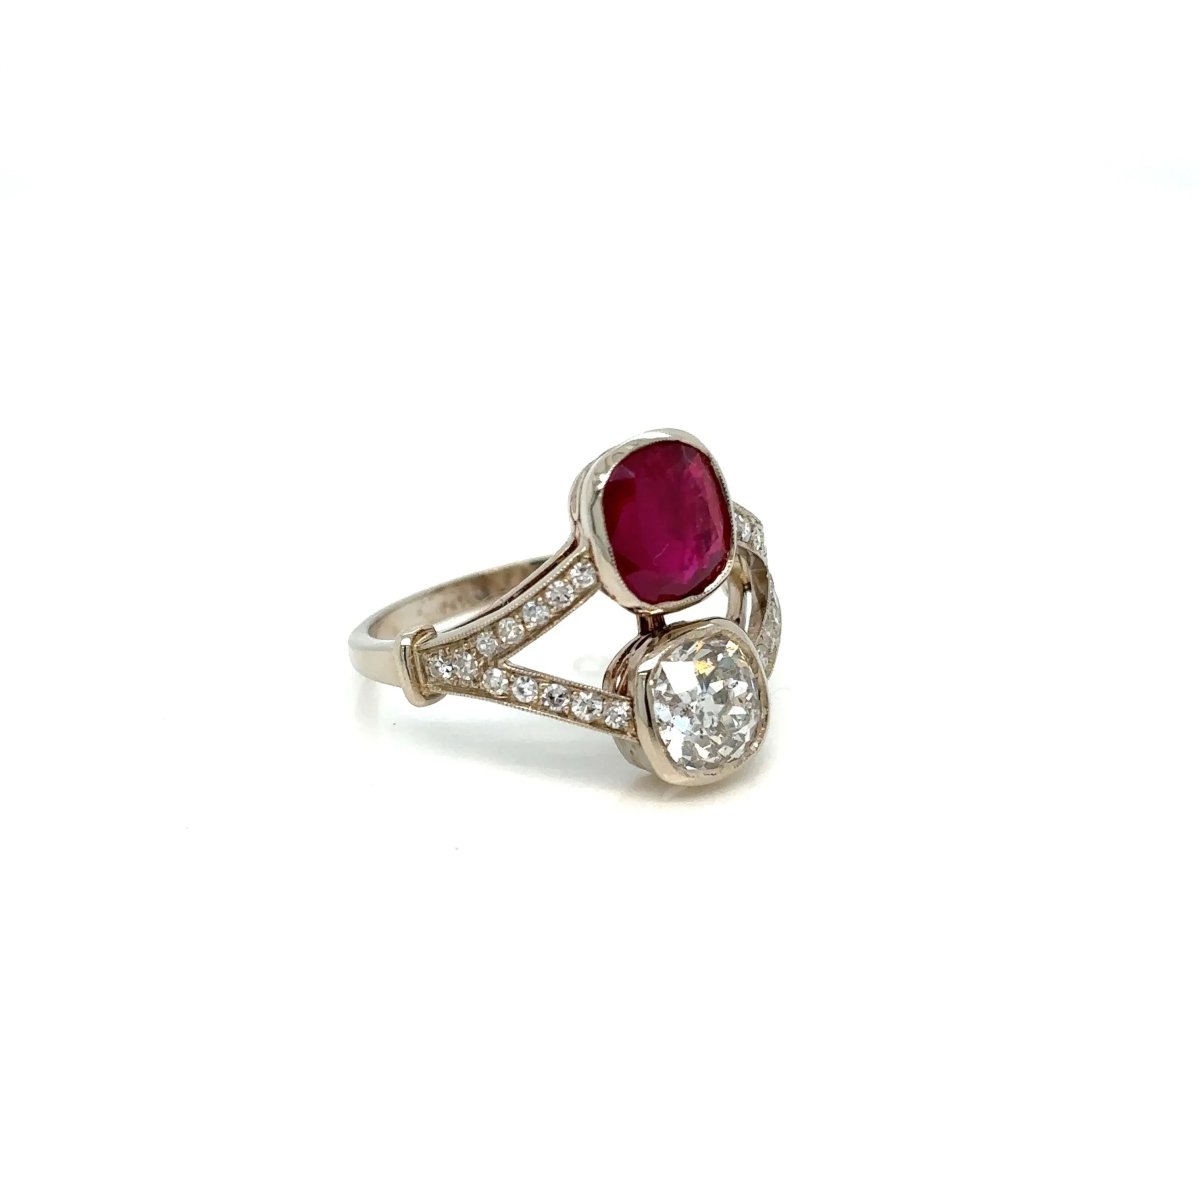 Victorian Certified Natural Unheated Ruby Diamond Vous et Moi Ring - Castafiore